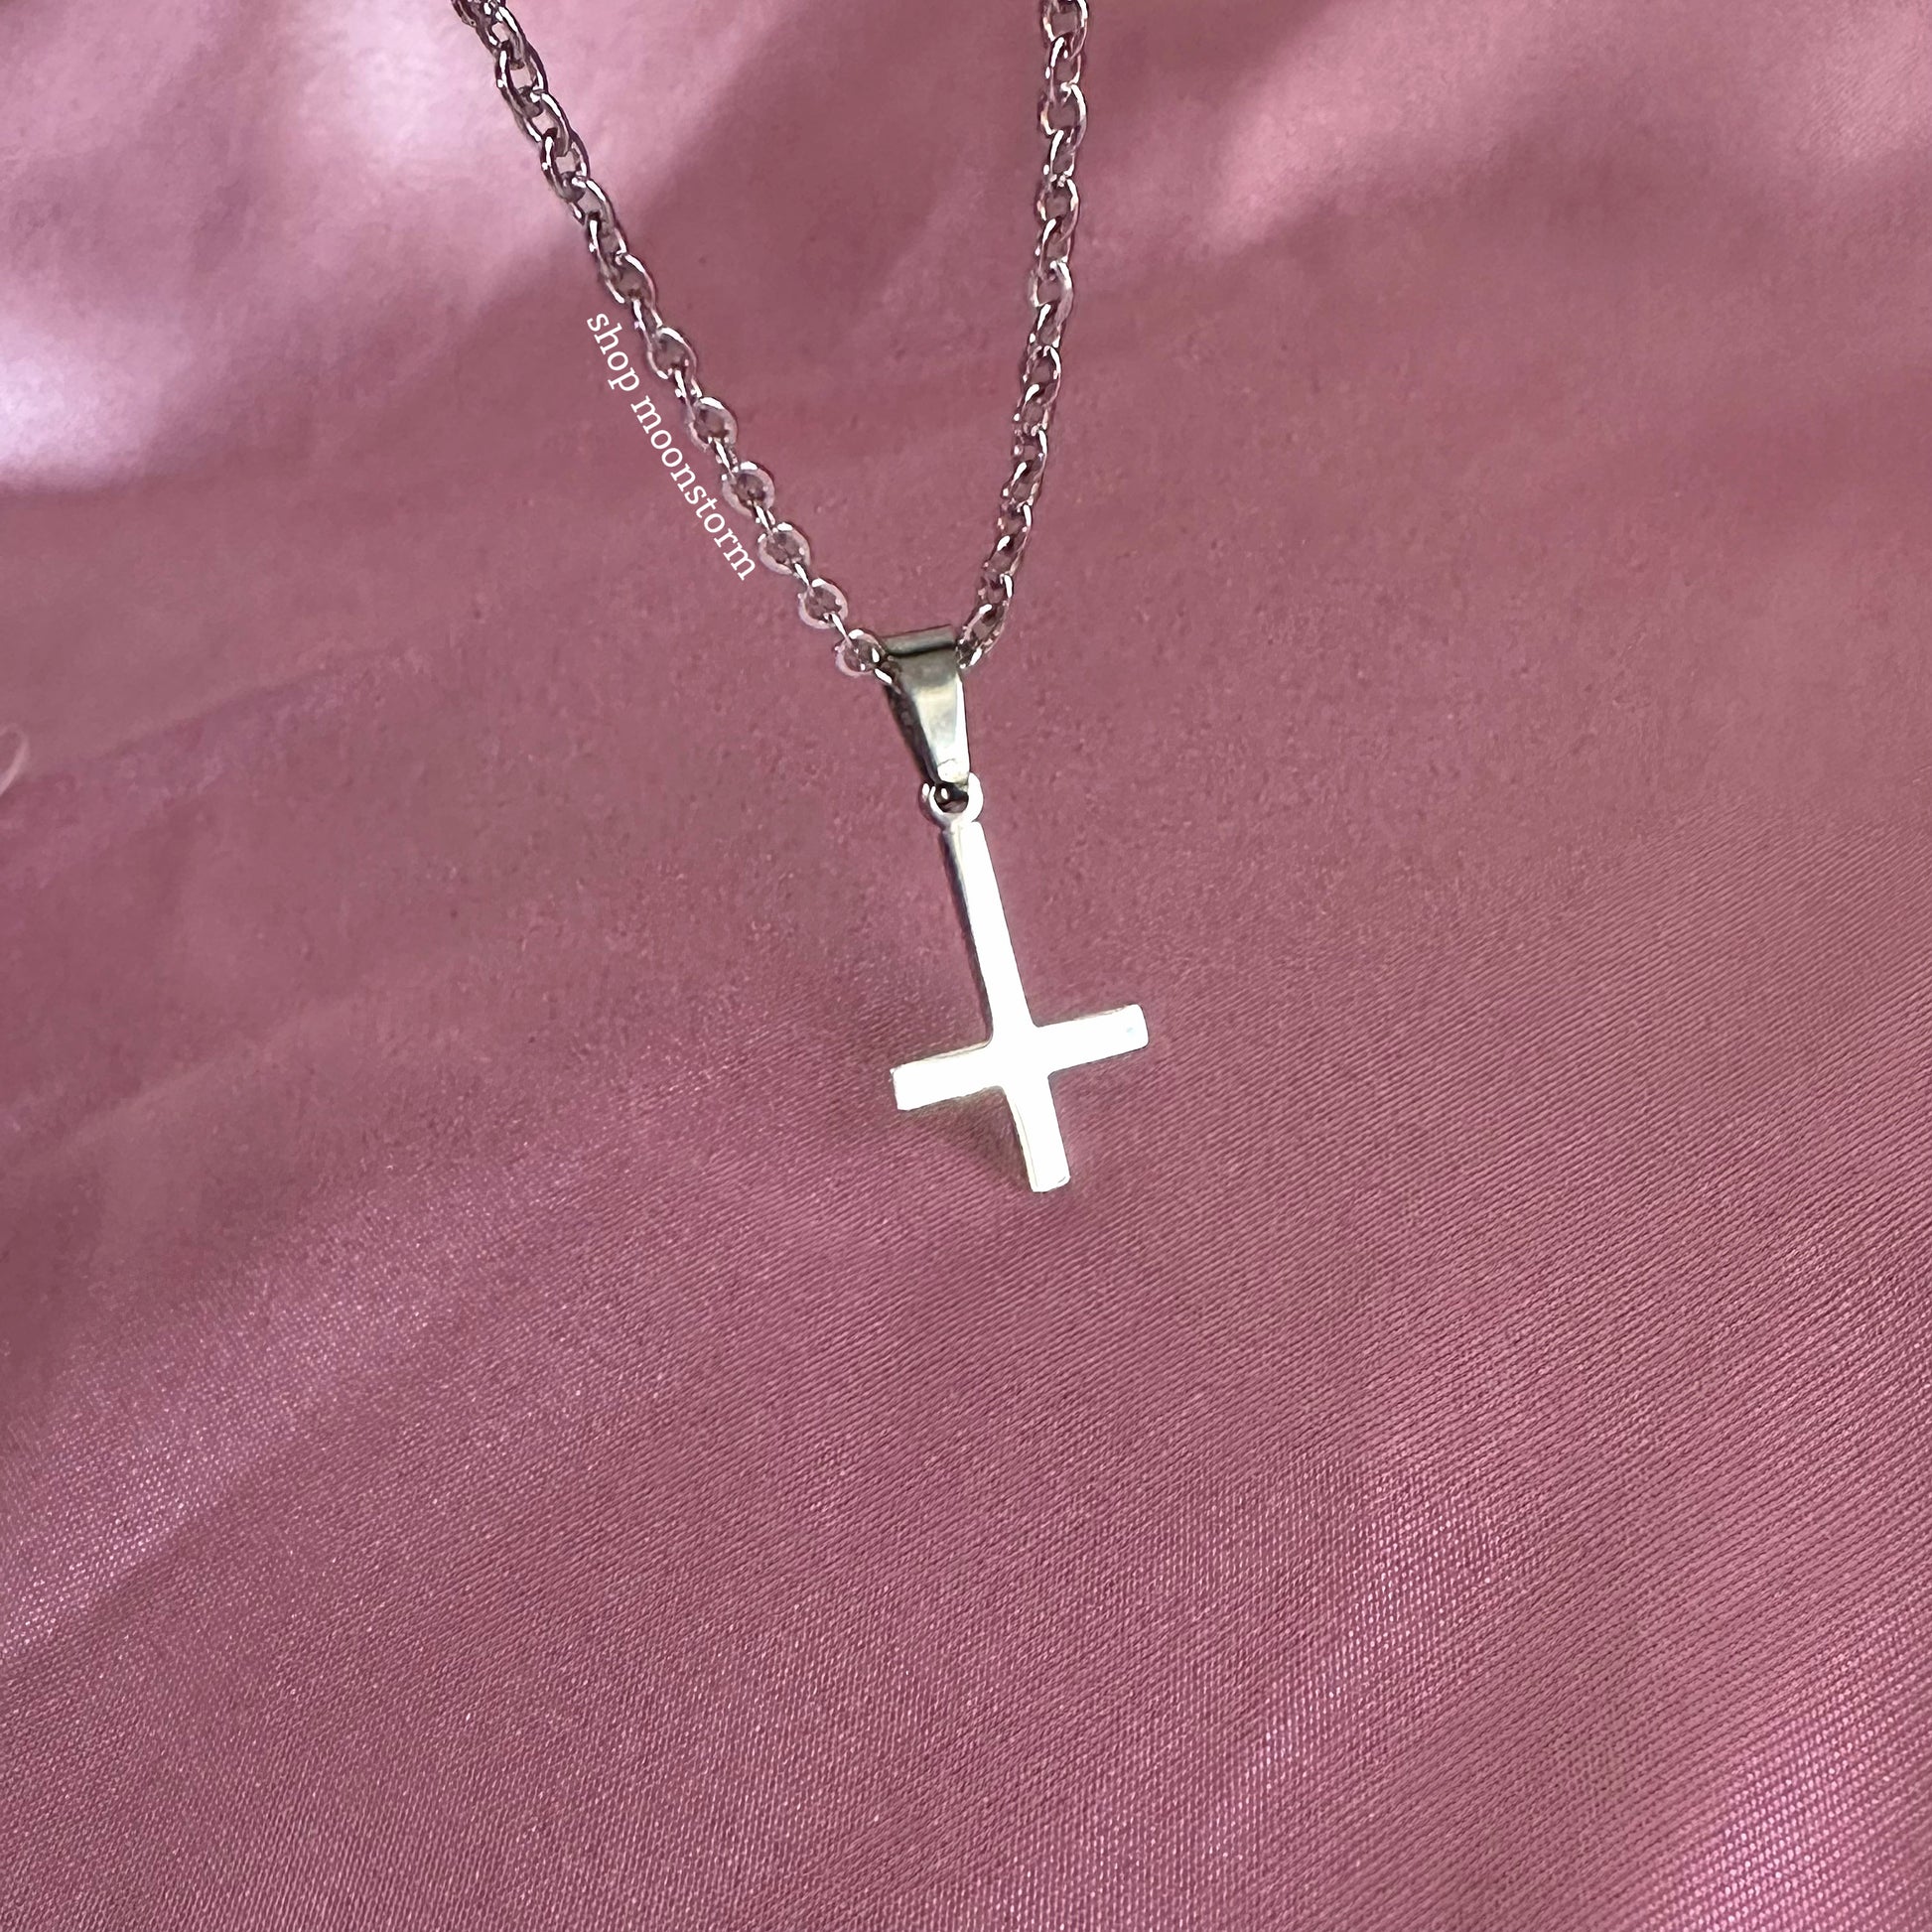 Inverted Cross Necklace 16-18